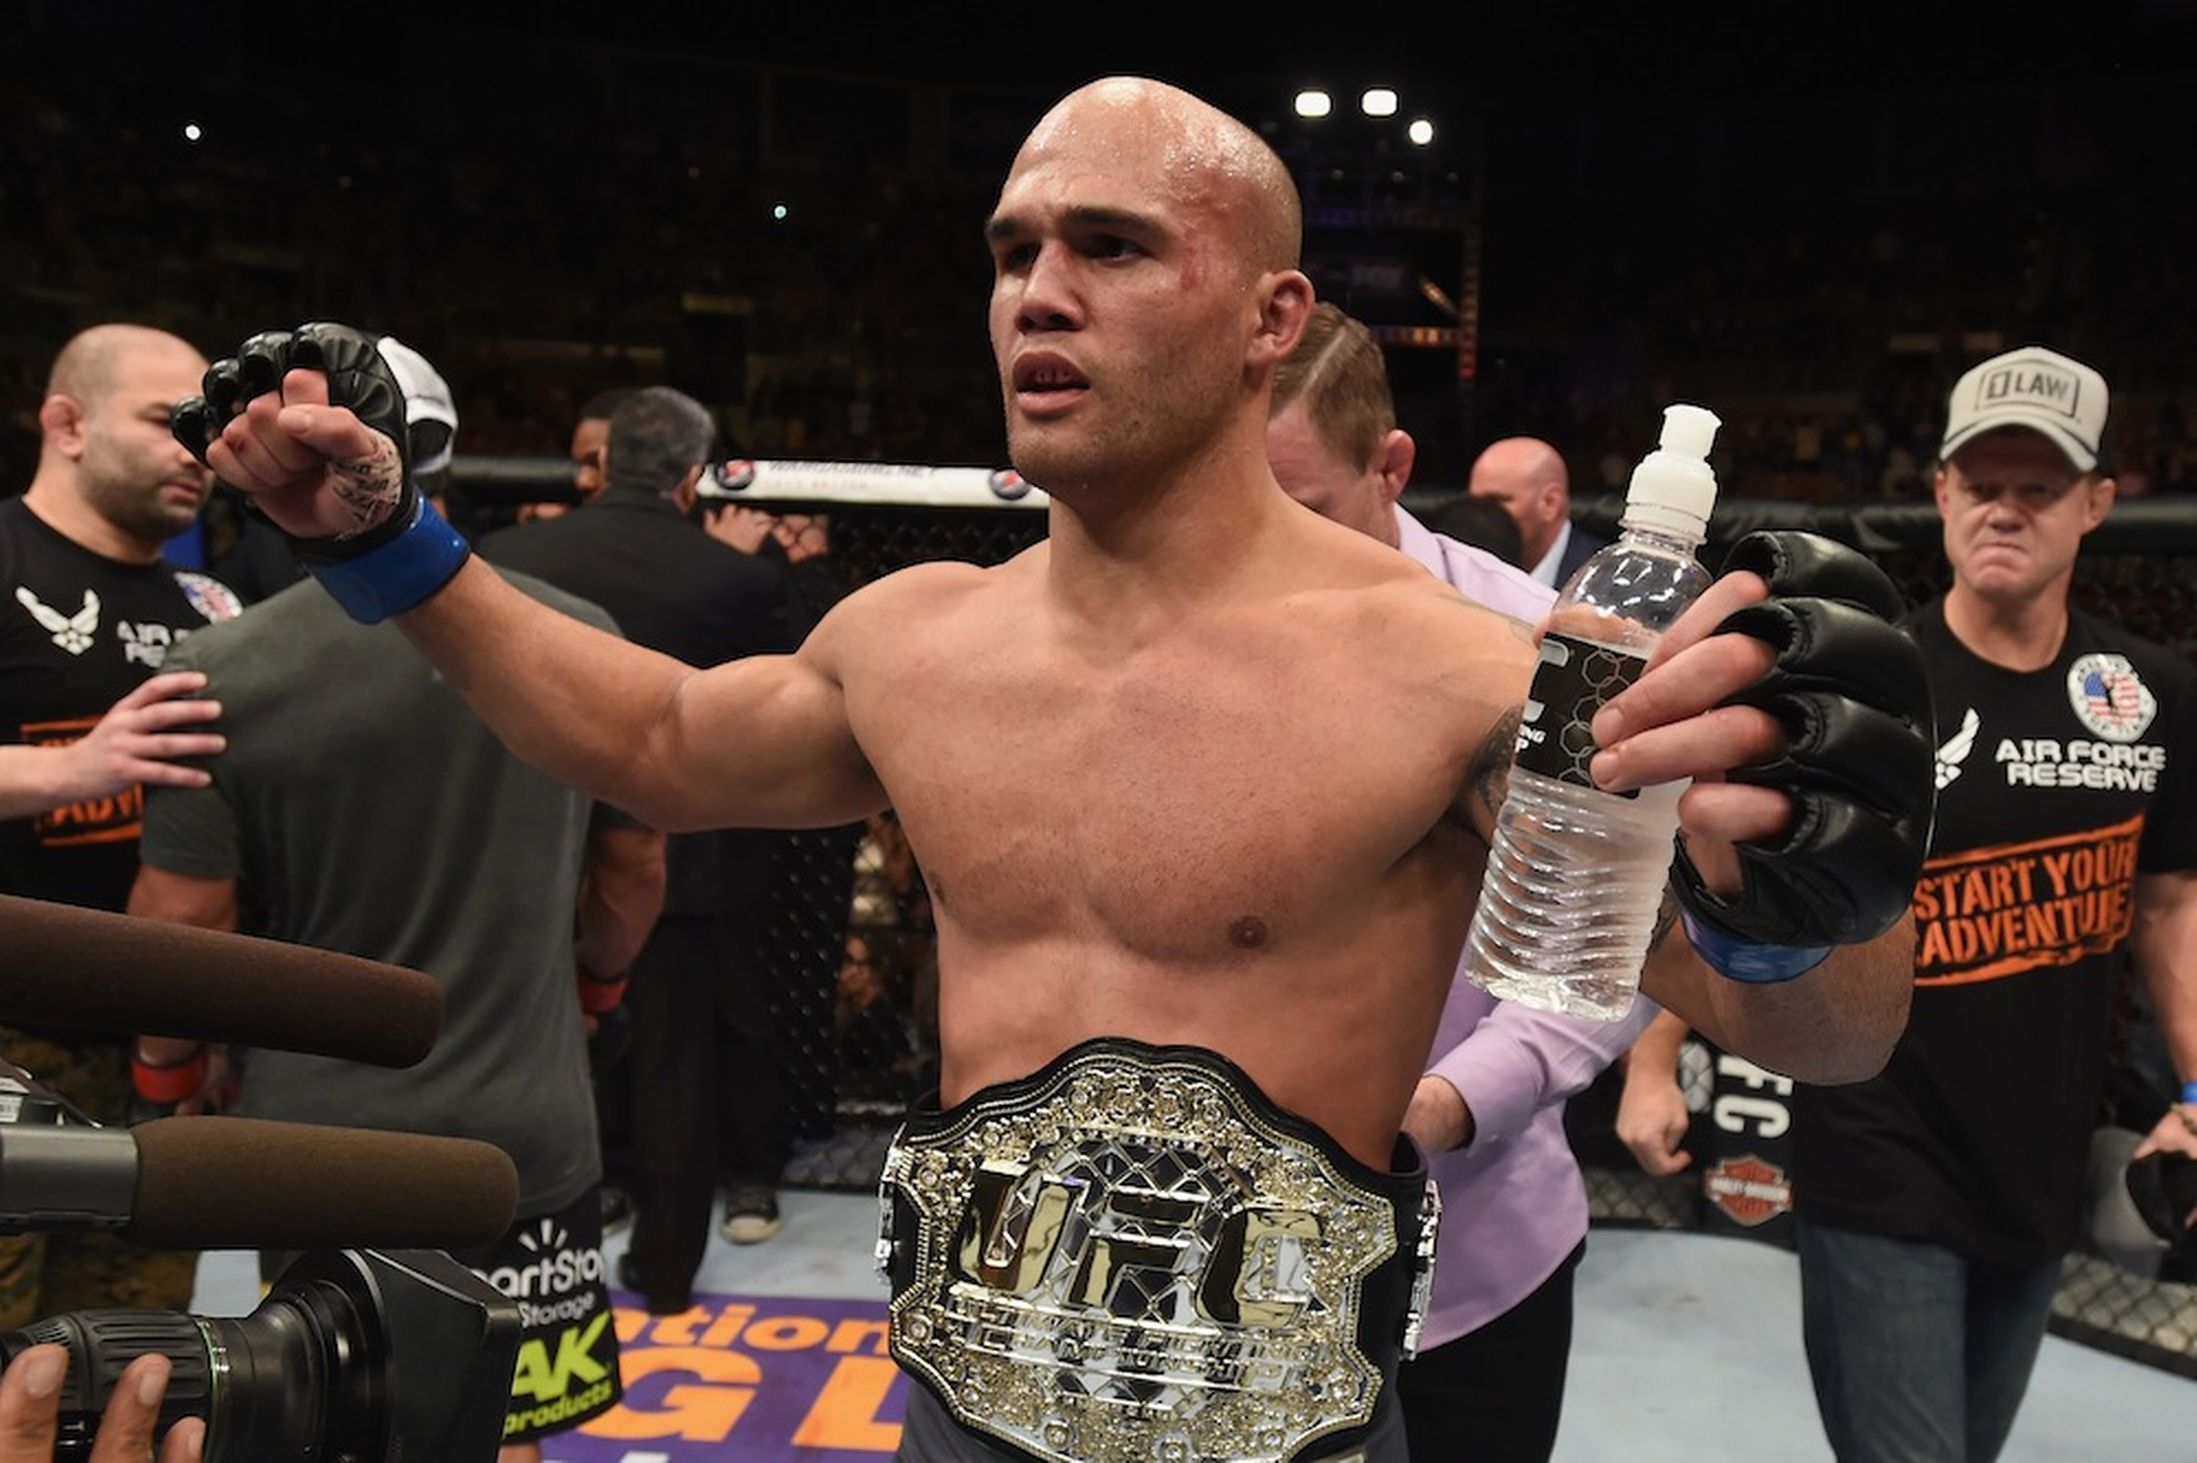 Robbie-Lawler-reacts-to-his-victory-over-Johny-Hendricks